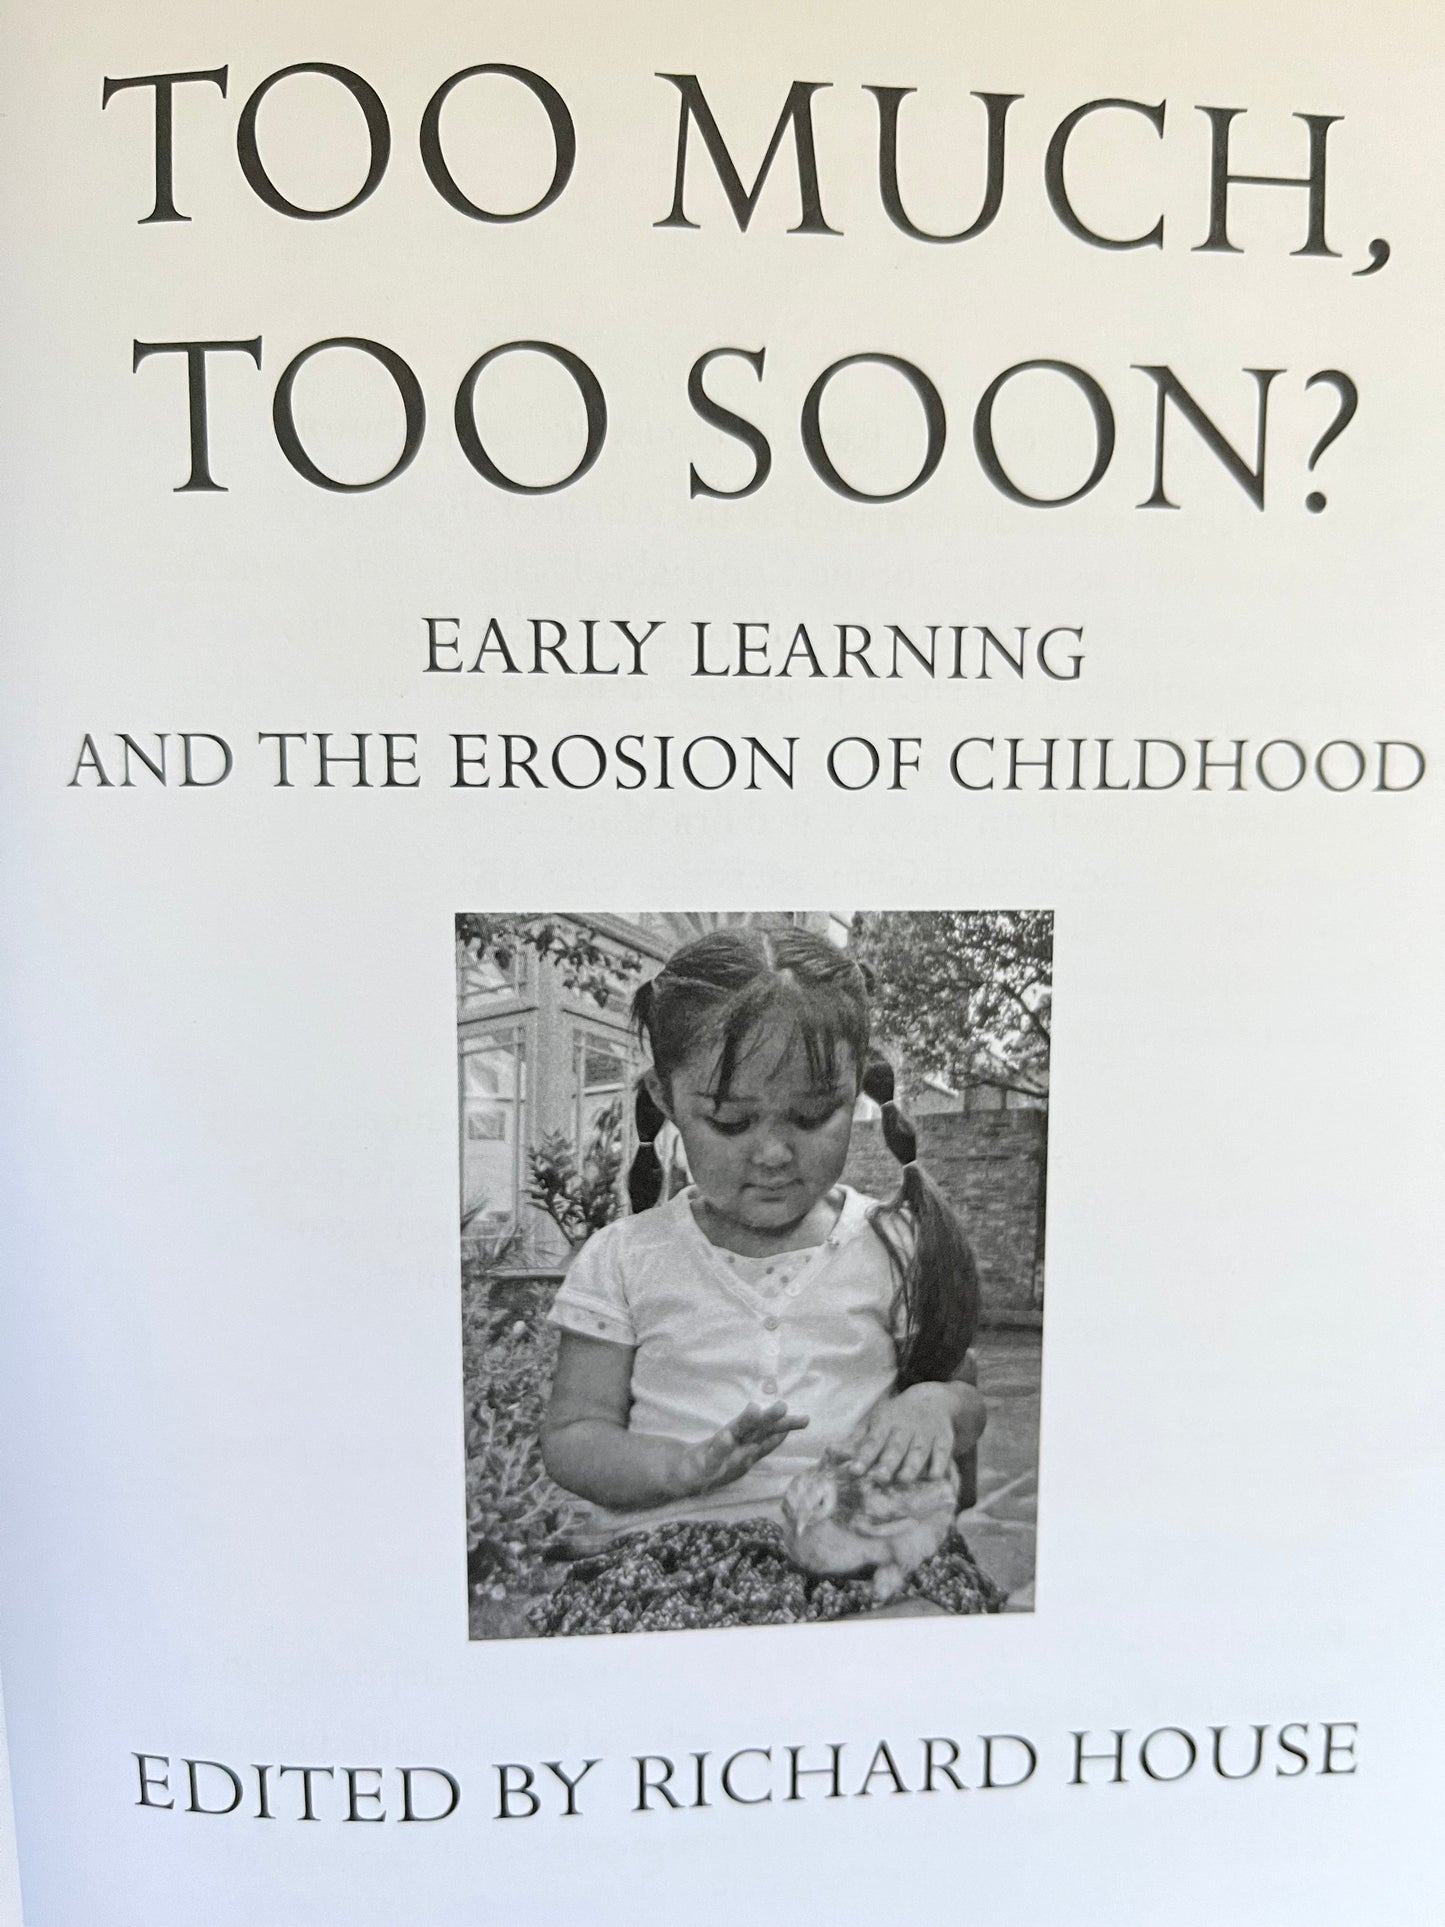 Parenting Resource Book - TOO MUCH, TOO SOON? Early Learning and the Erosion of Childhood